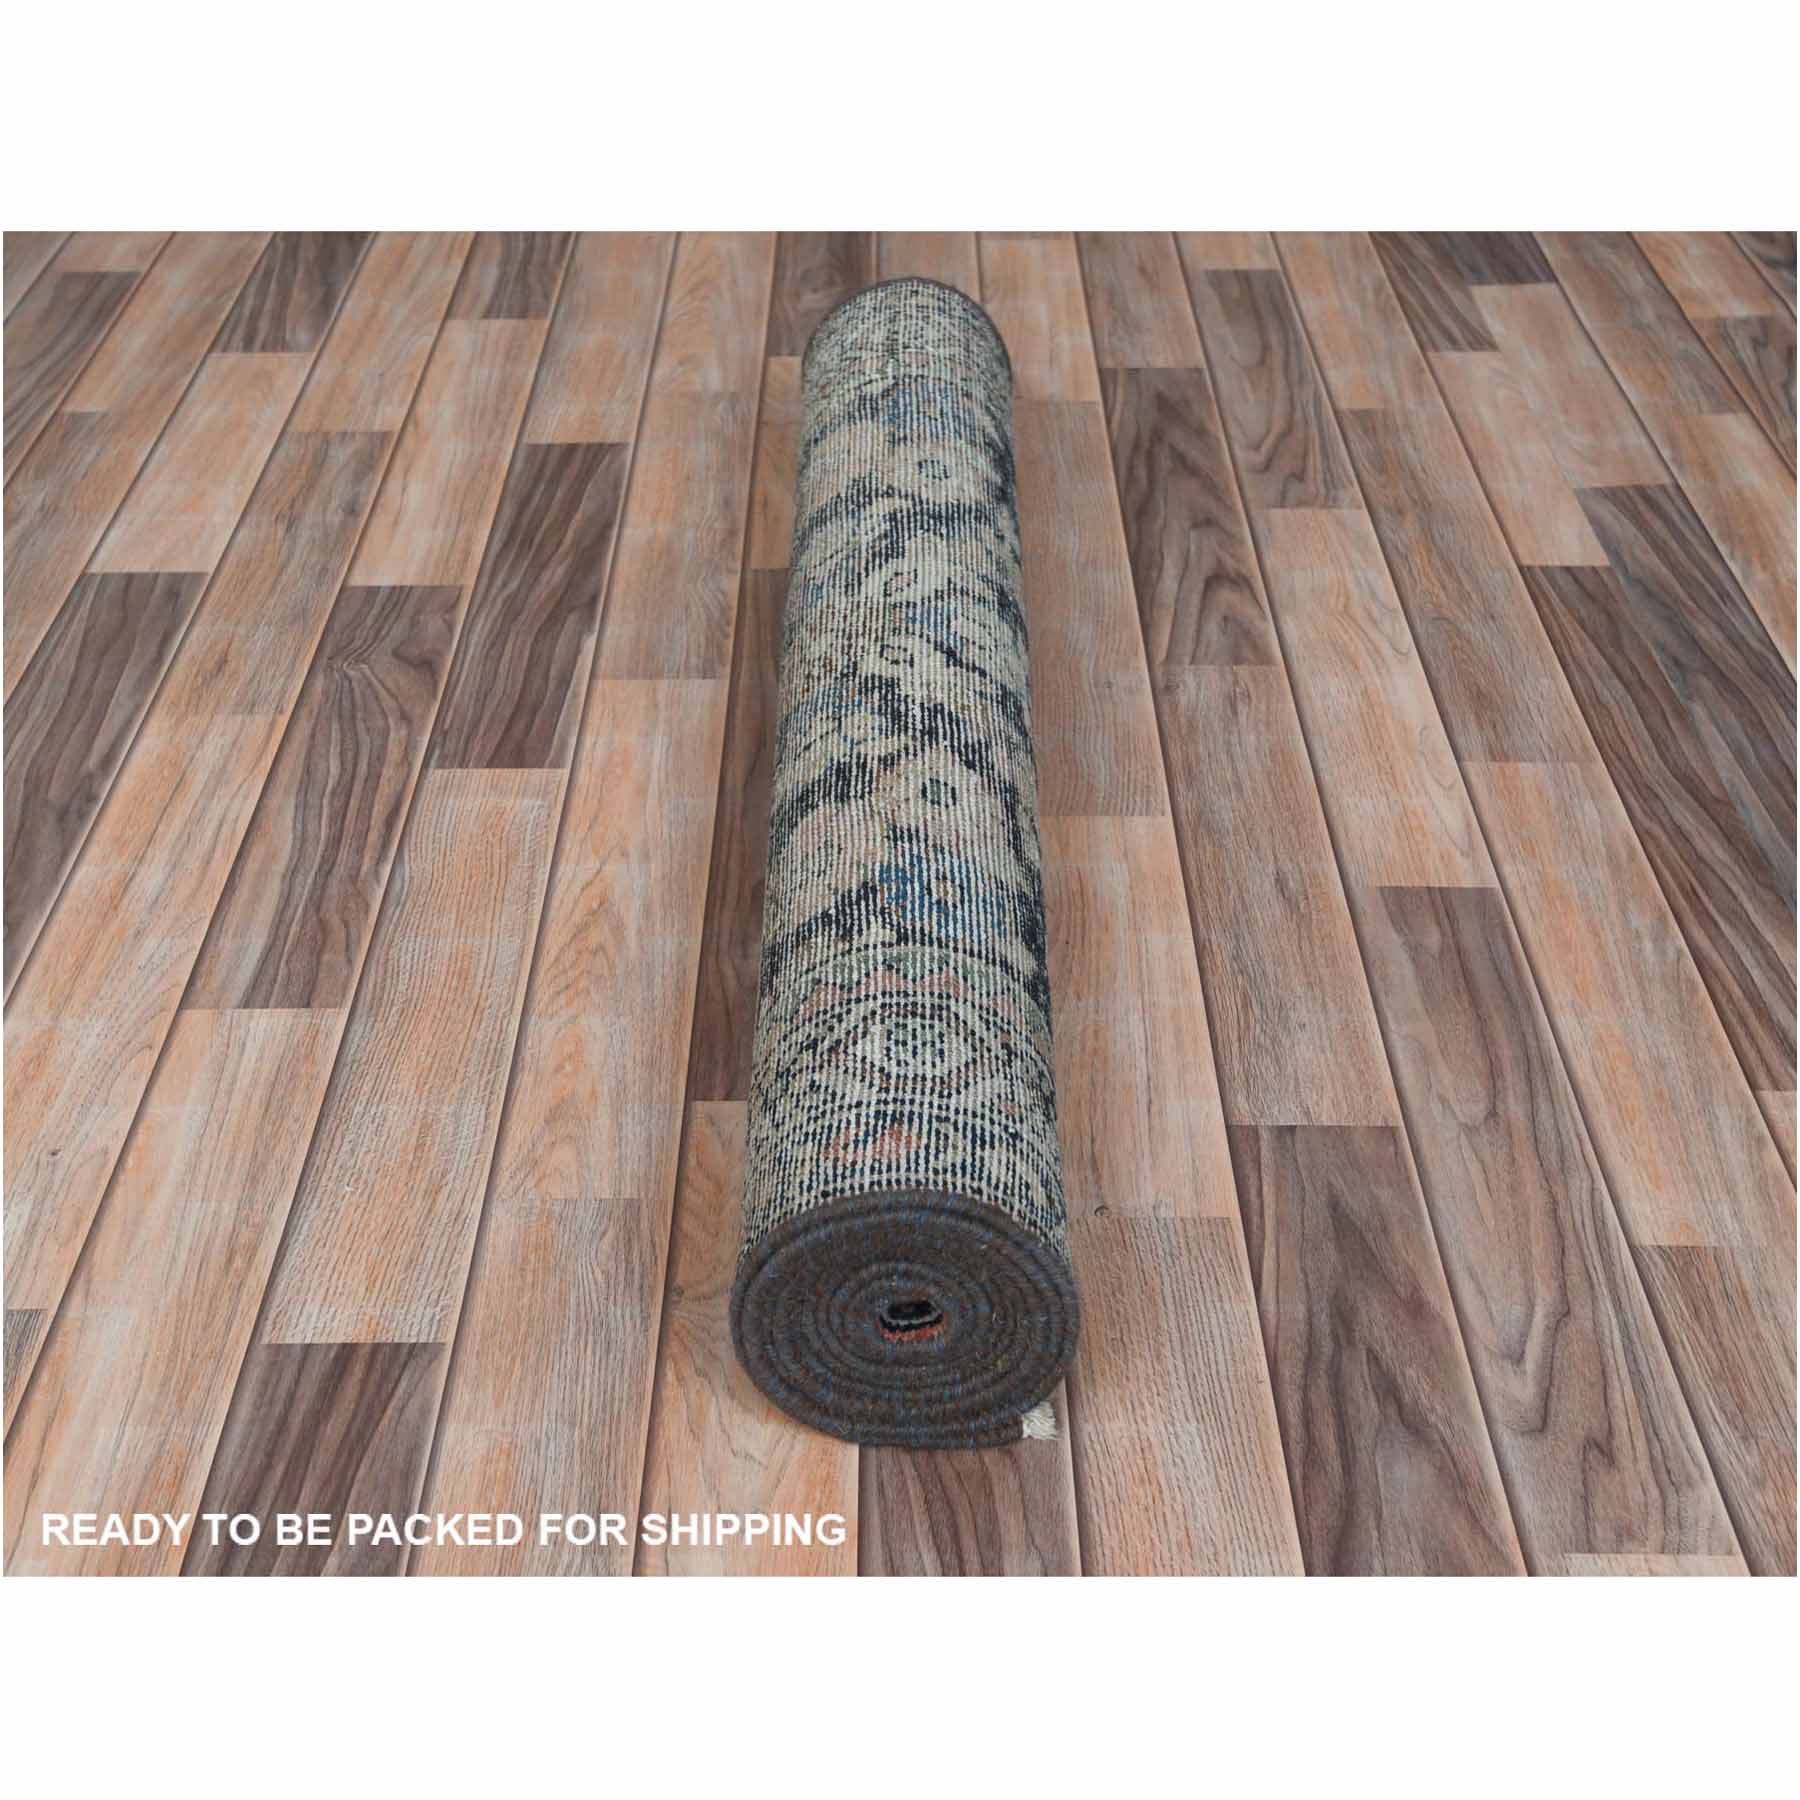 Overdyed-Vintage-Hand-Knotted-Rug-309305